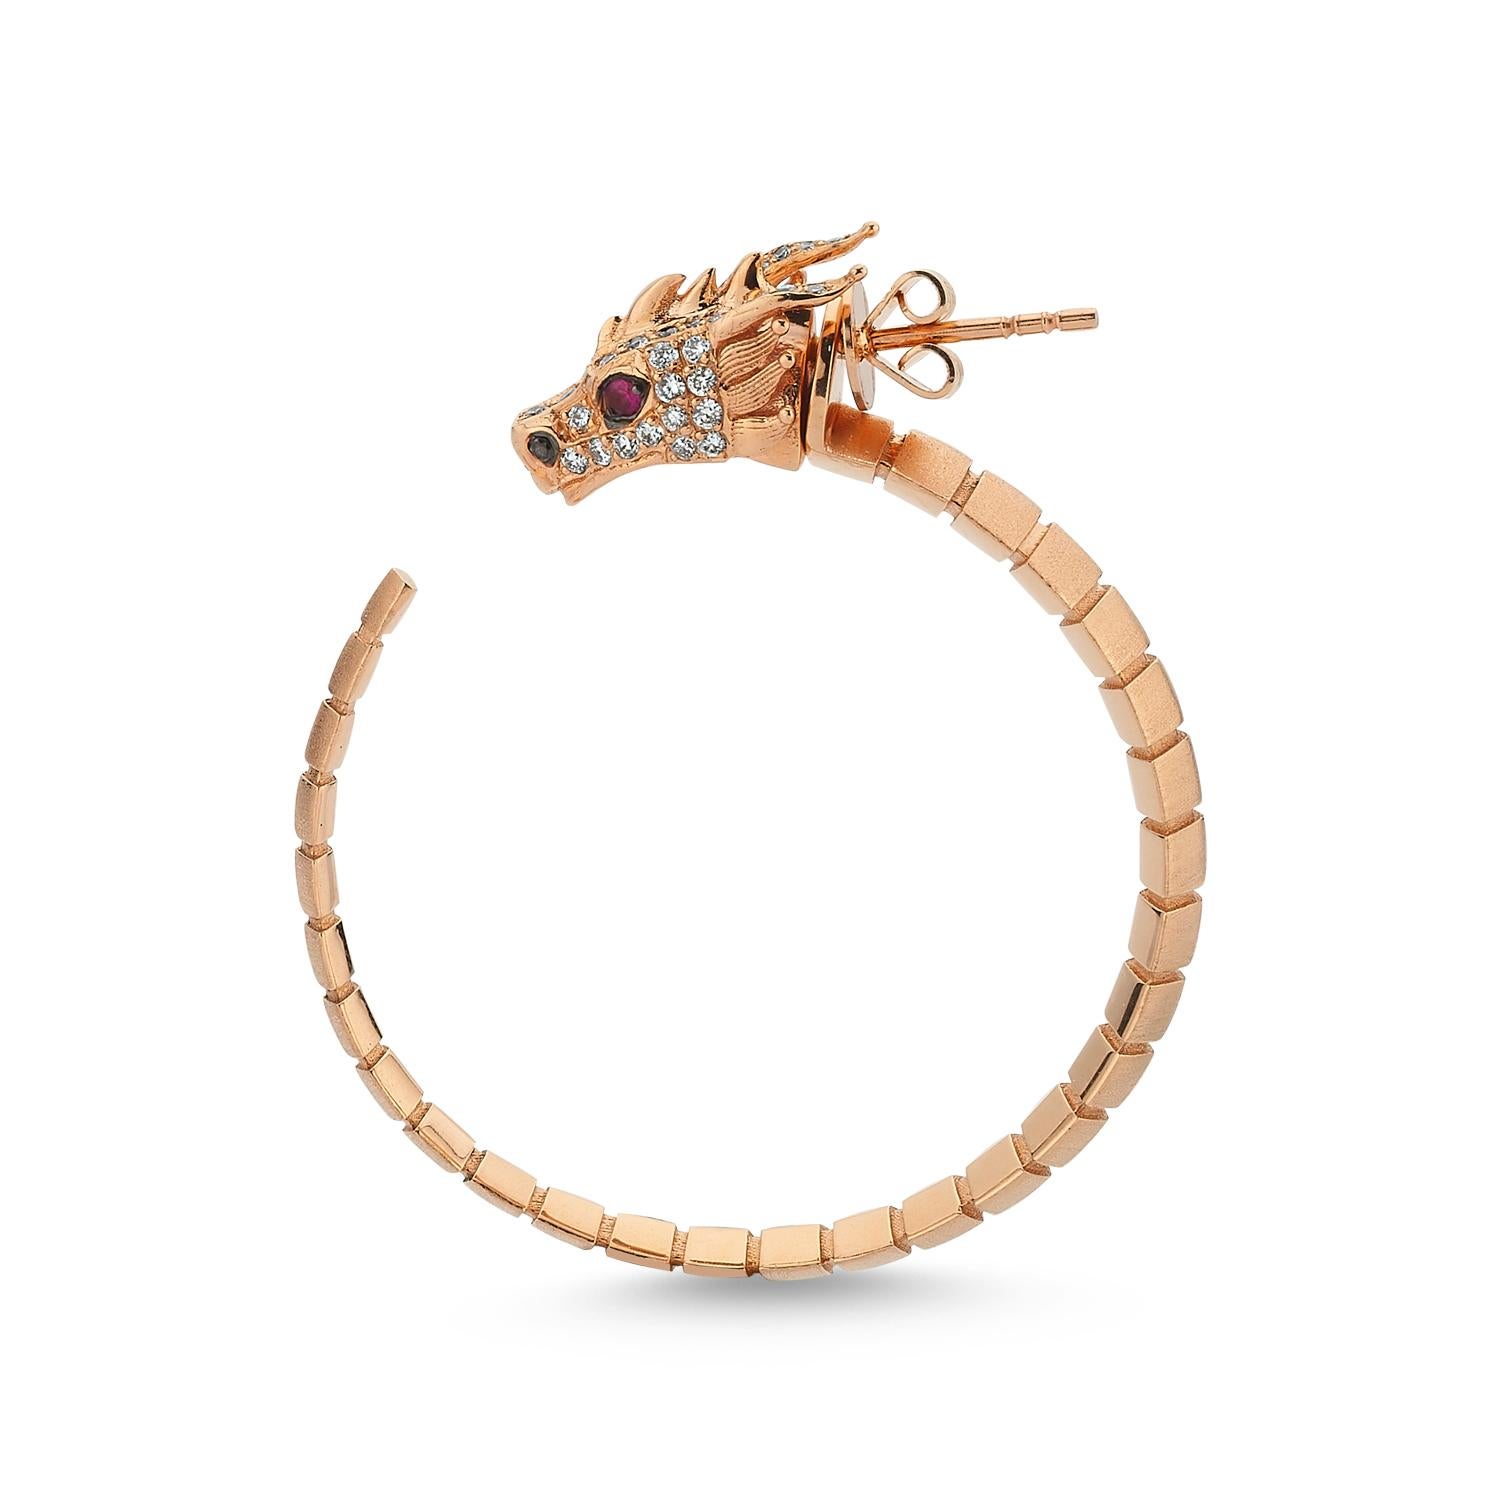 Dragon Lady Collection is inspired by the fire element which is one of the elements that represents our life energy. The main form of the collection is dragon; it is the symbol of strength, courage and prosperity.

Ananta sesha 14k rose gold hoop